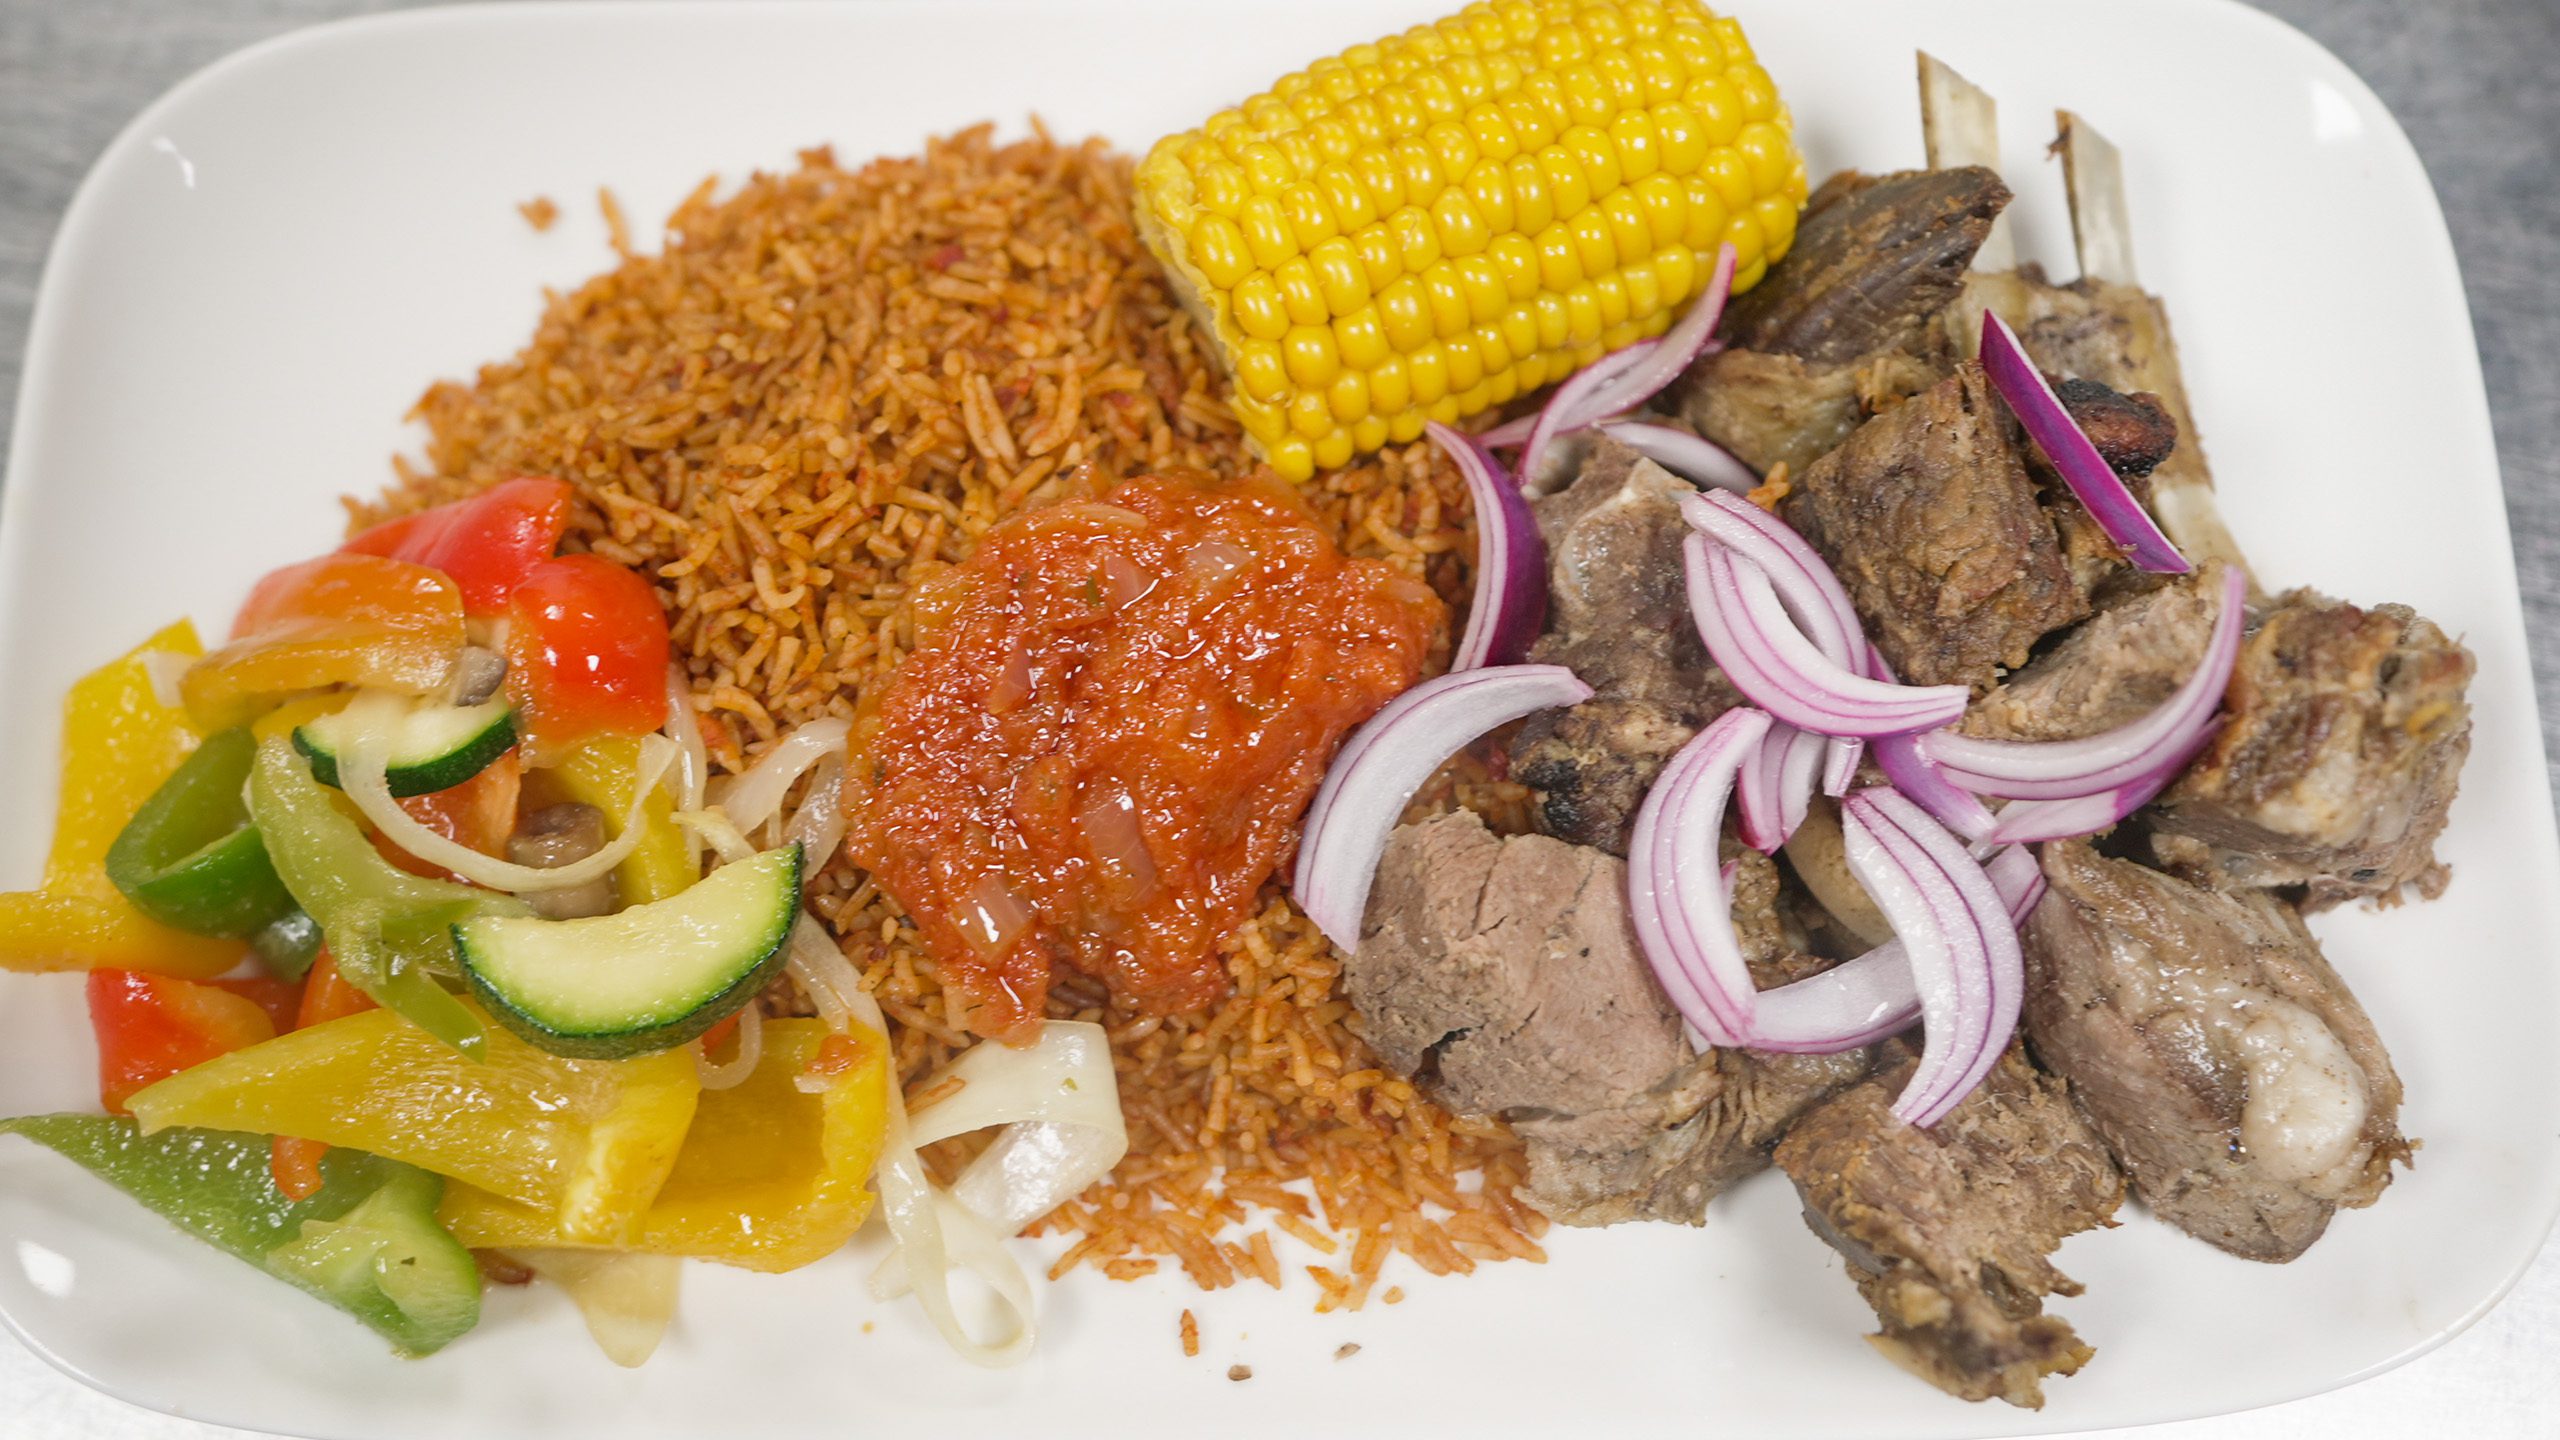 West African jollof rice, goat meat, corn, and salad in Amsterdam, the Netherlands | Davidsbeenhere